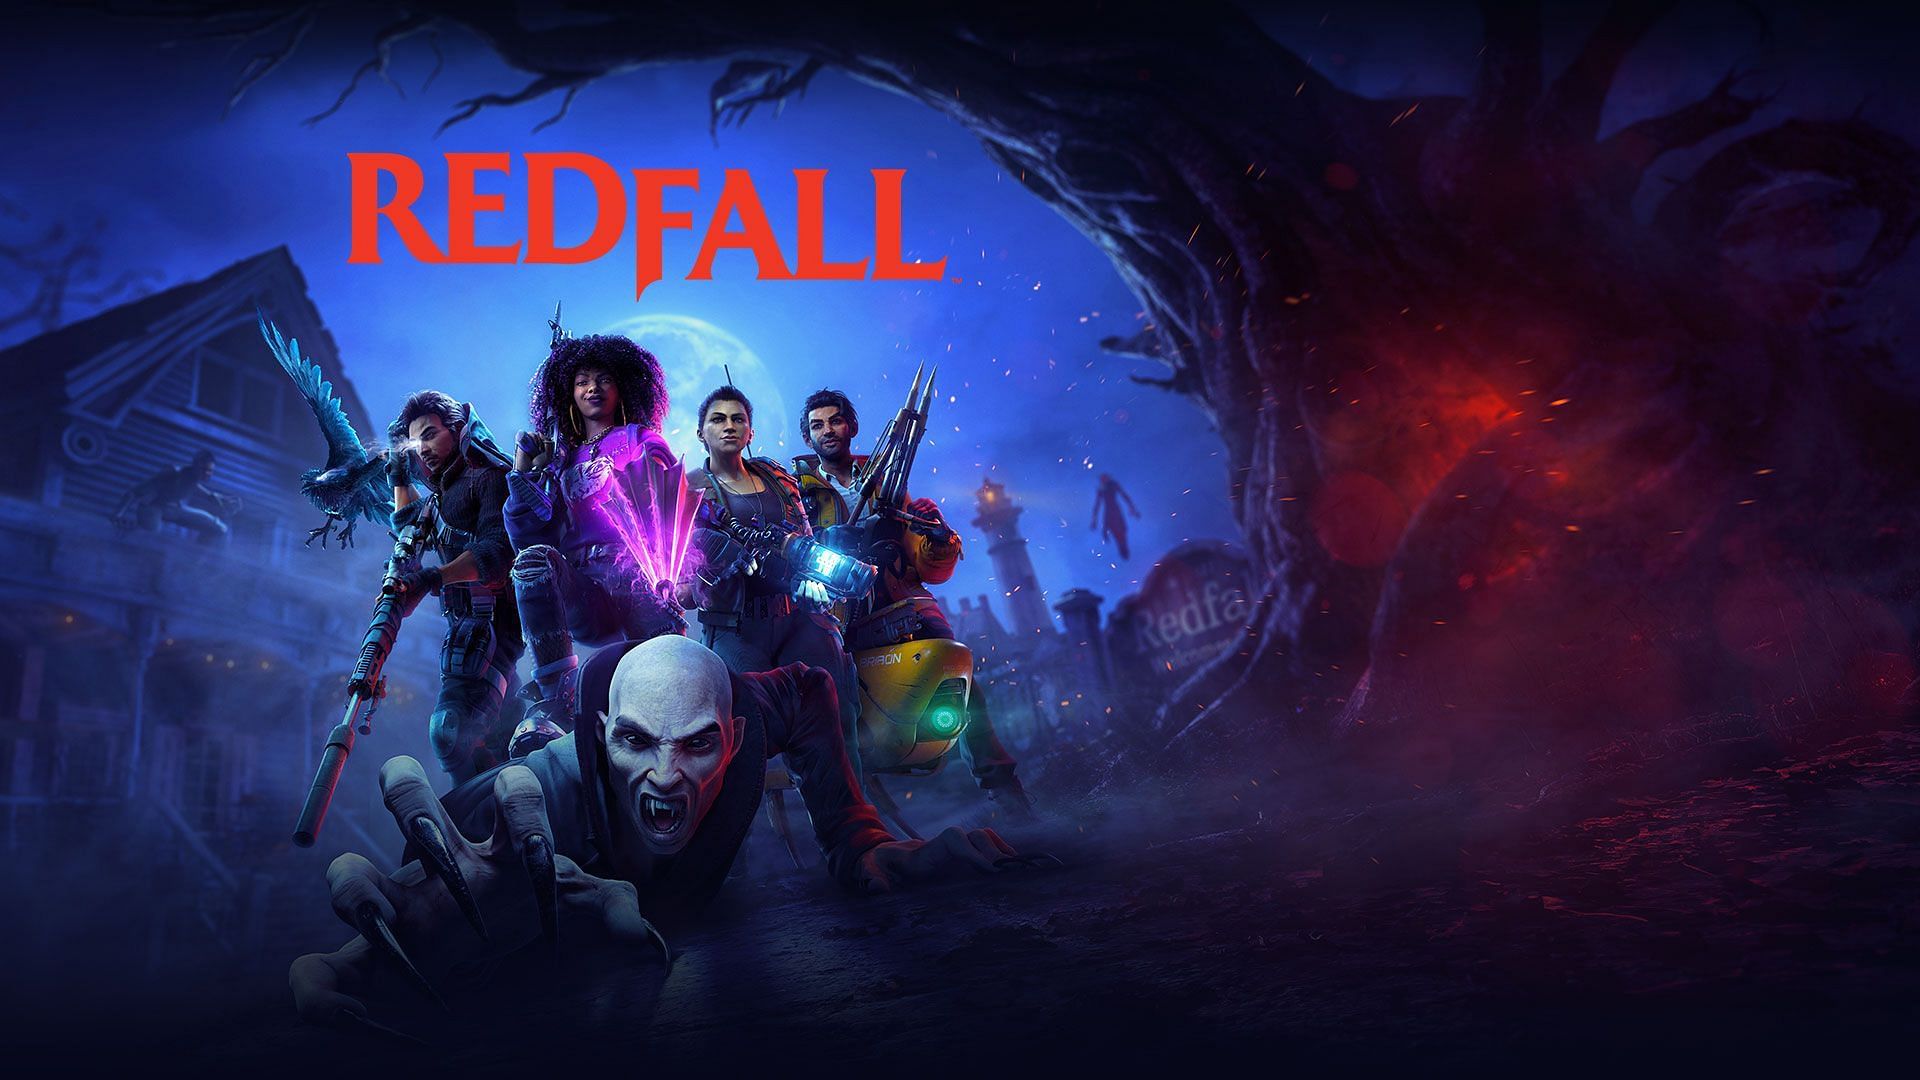 Xbox exclusive game 'Redfall' likely to launch in May 2023 - Times of India